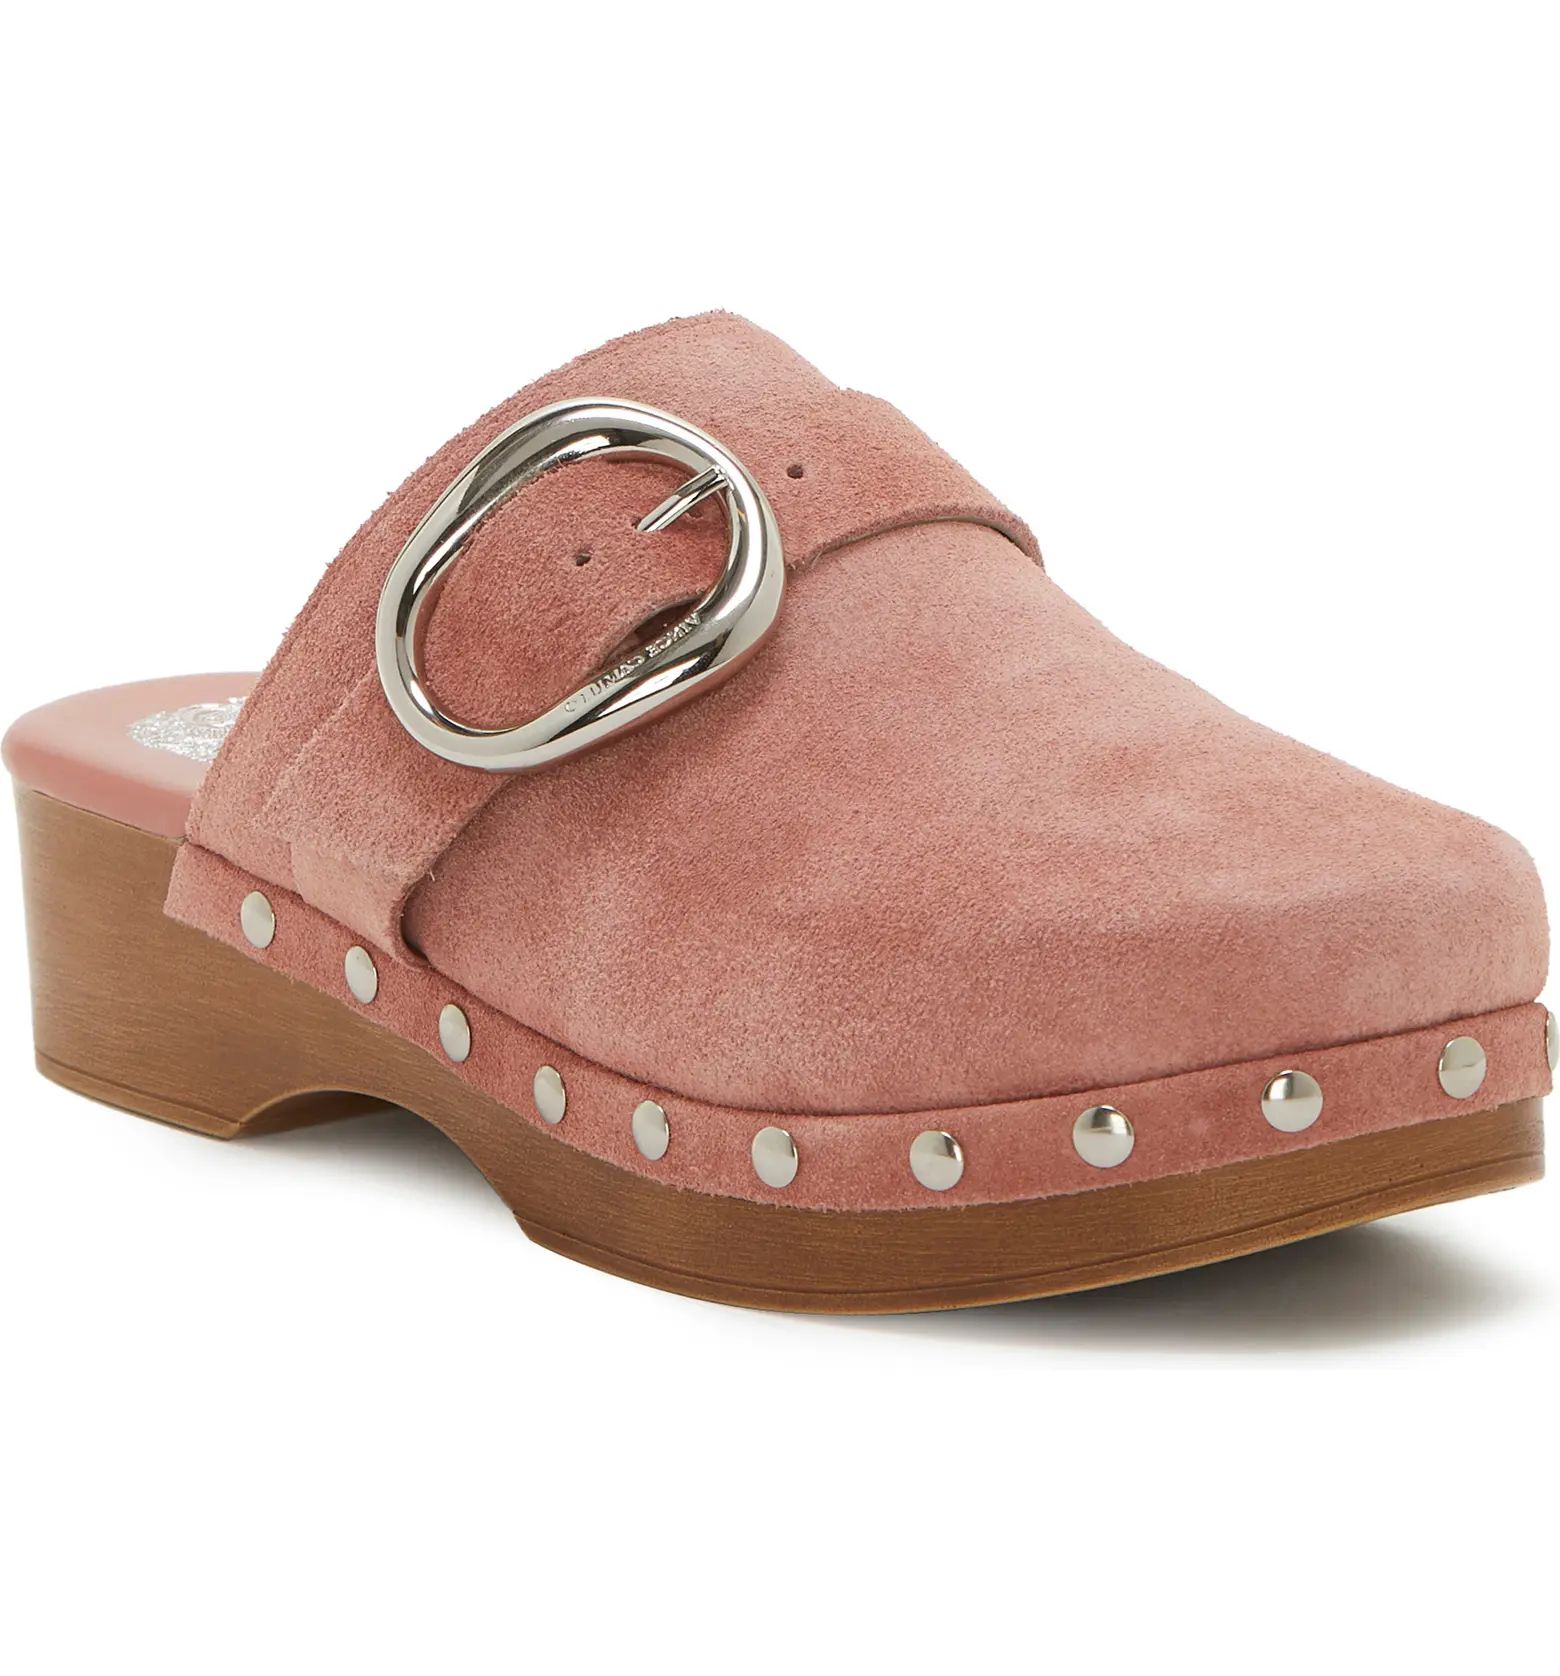 Canzenee Clog | Nordstrom